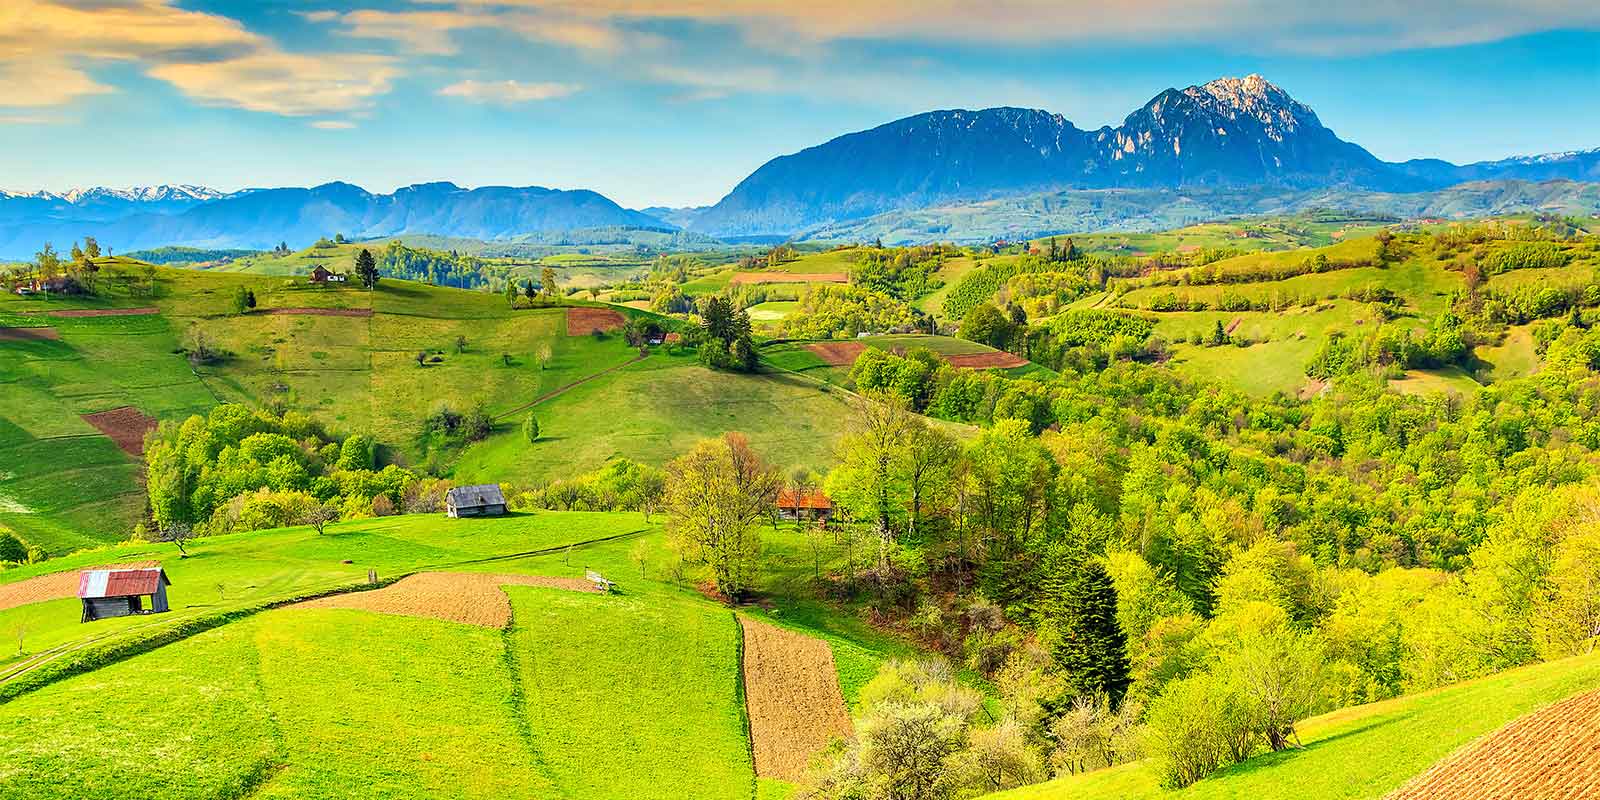 Transylvanian landscape and green fields of the Carpathian mountains